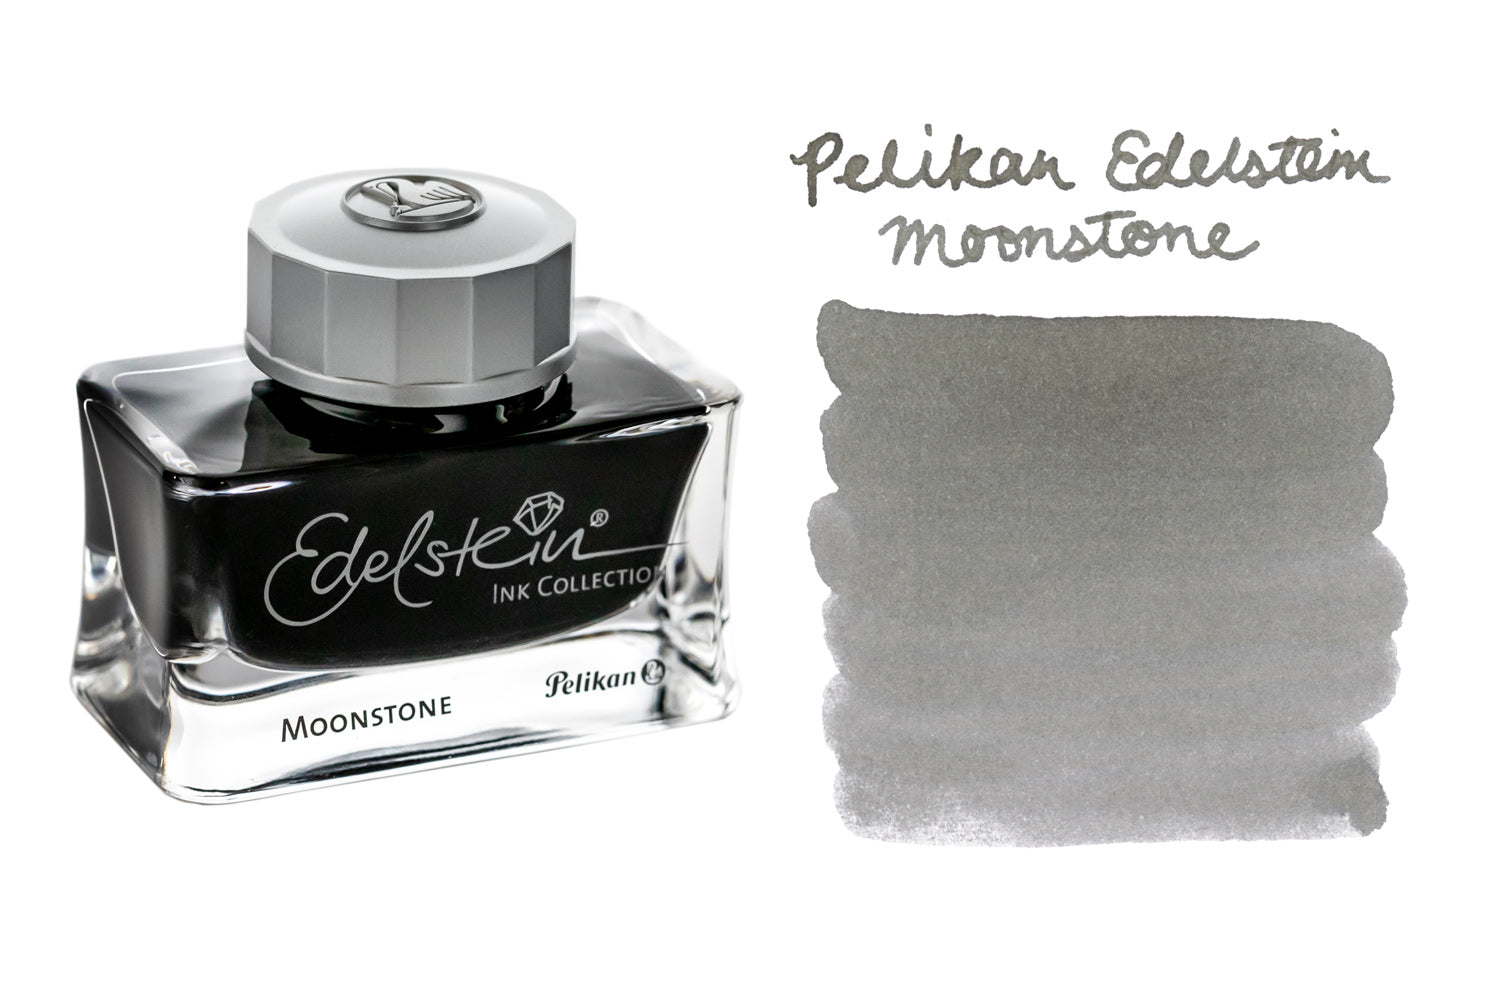 interferentie mist Iets Pelikan Edelstein Moonstone - 50ml Bottled Fountain Pen Ink (Special  Edition) - The Goulet Pen Company